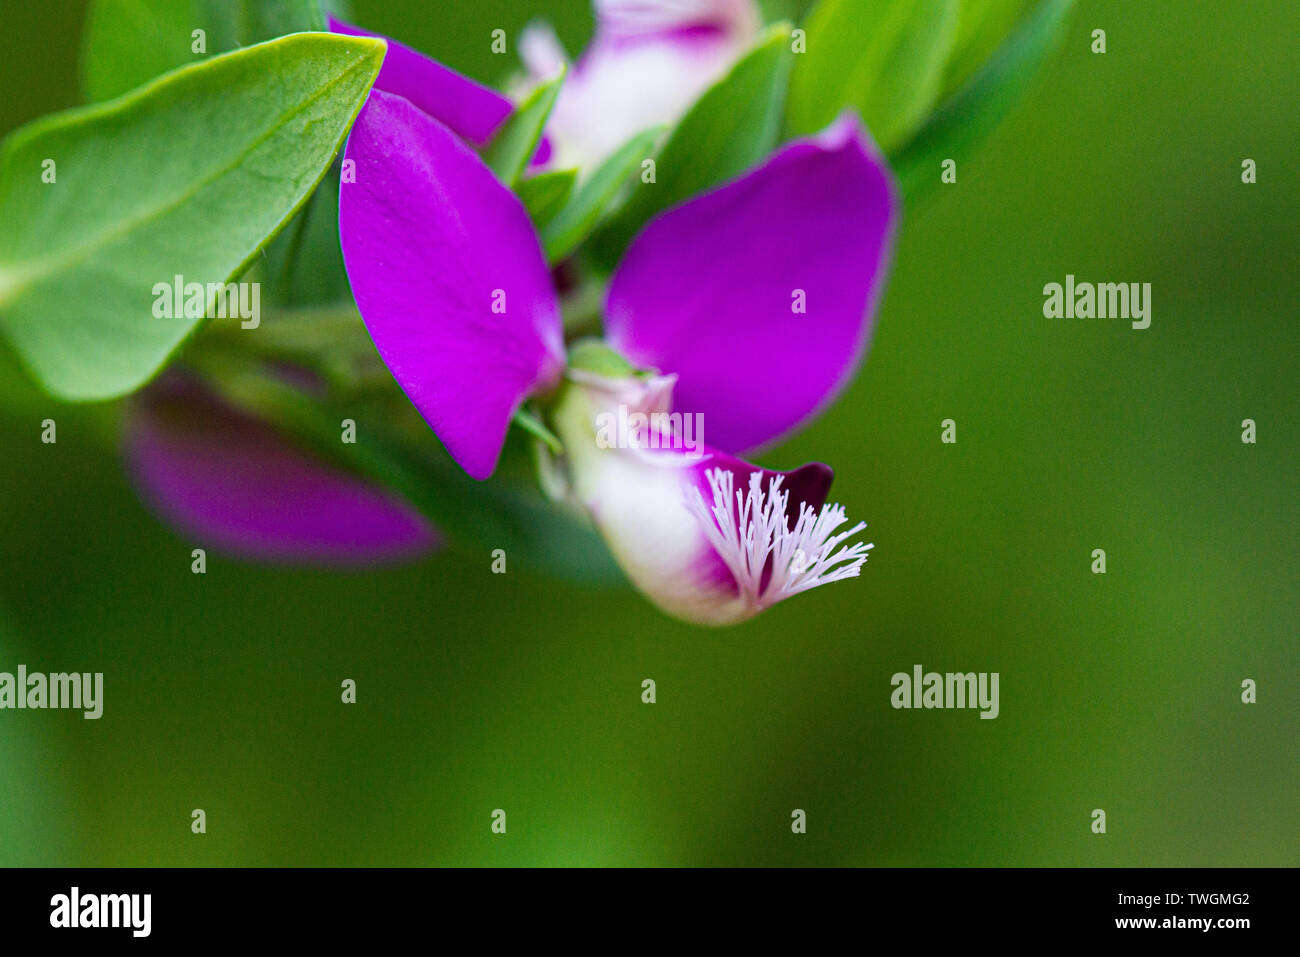 A close up of the flower of a Polygala myrtifolia var. grandiflora Stock Photo